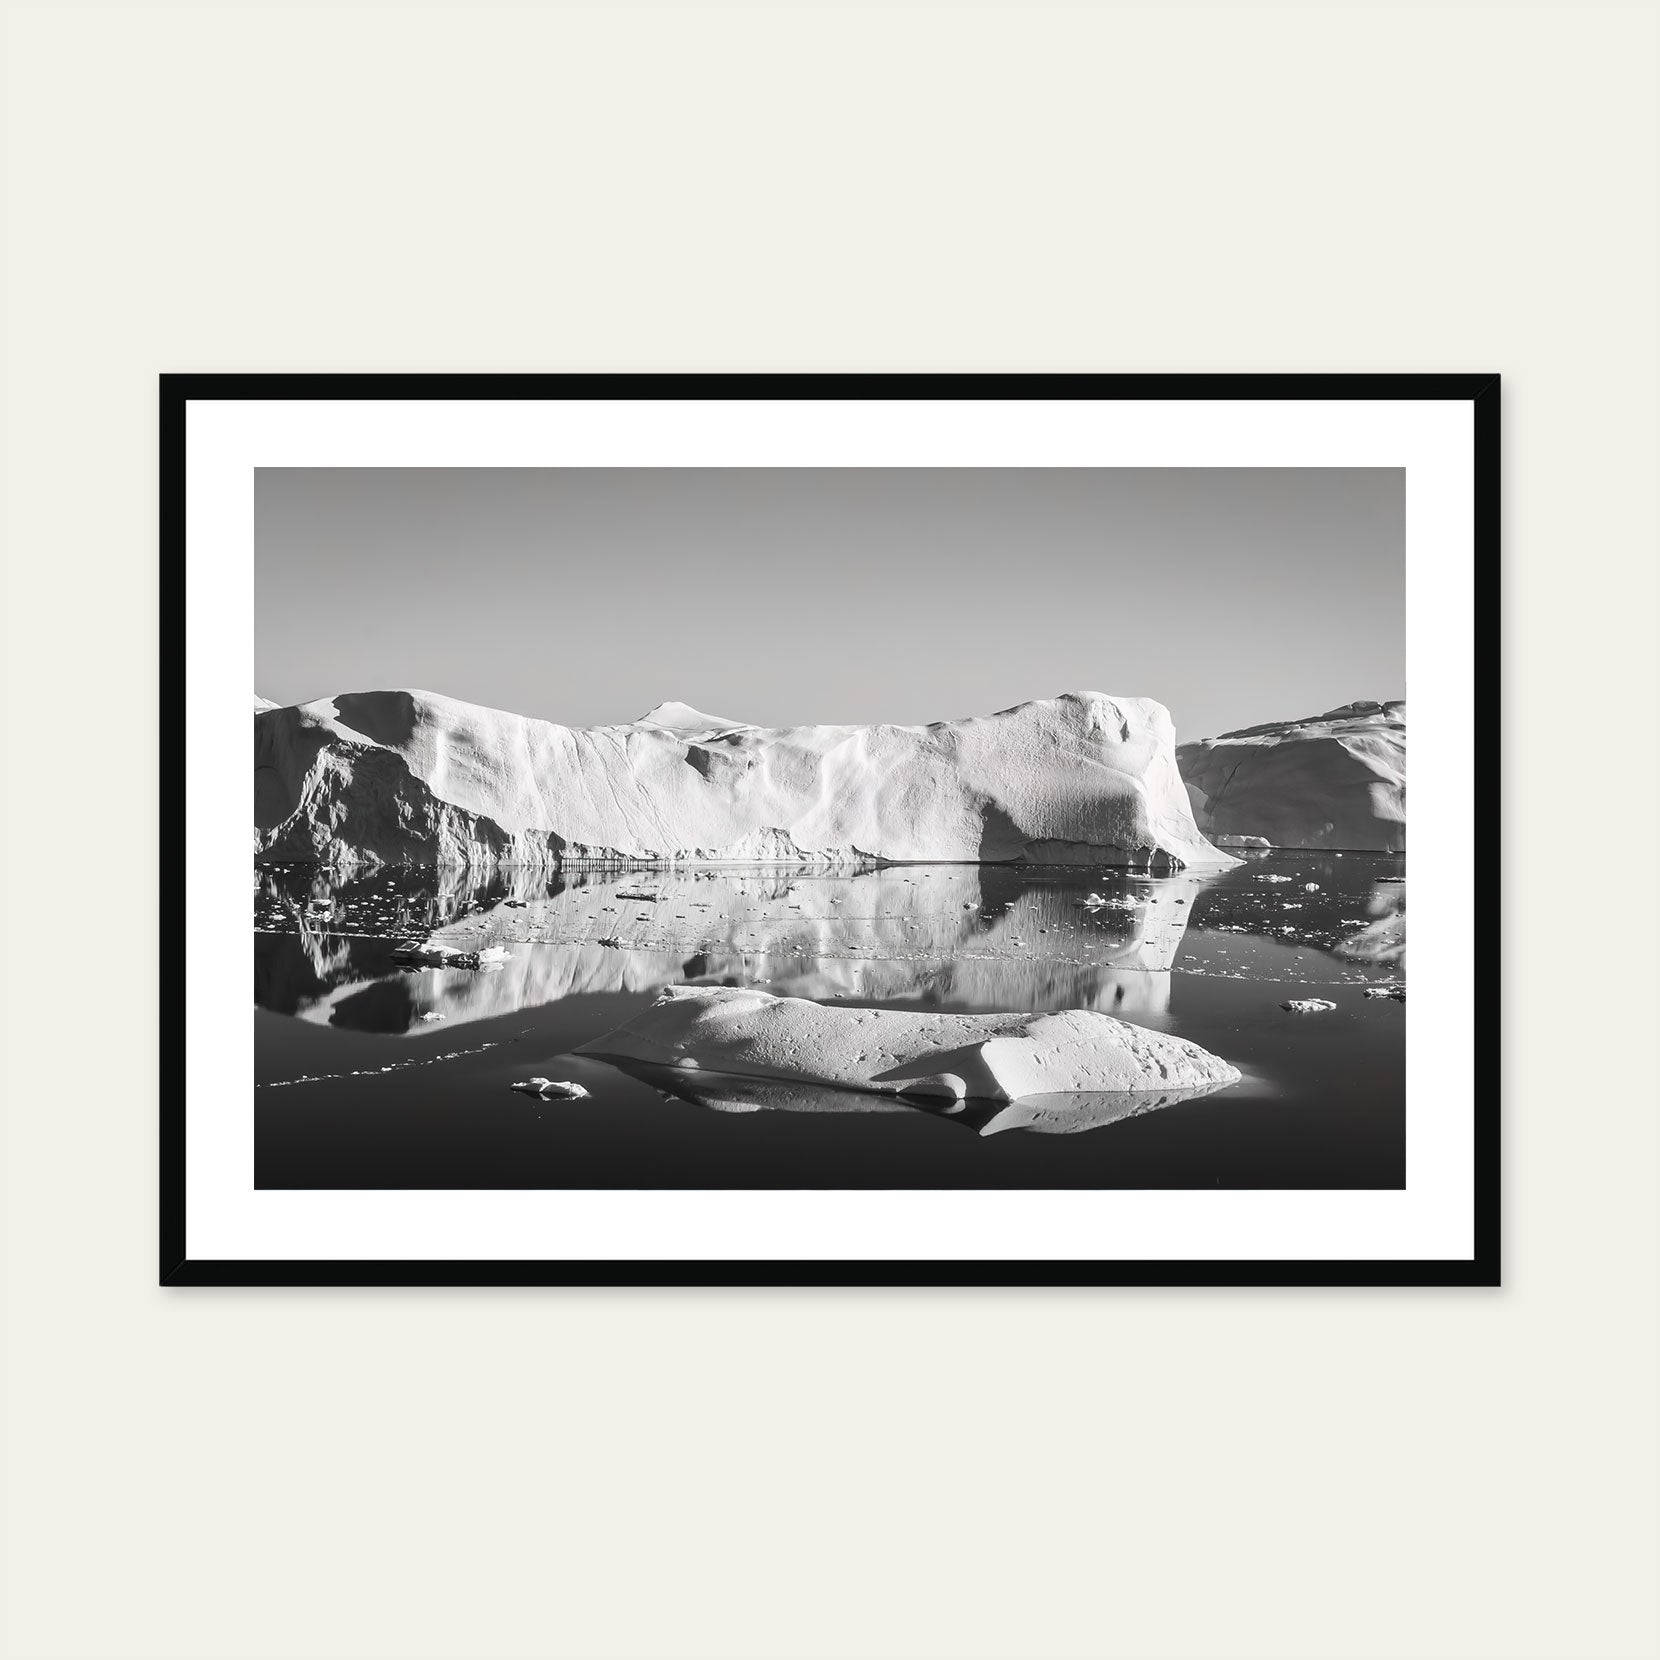 A black framed black and white print of icebergs in Greenland